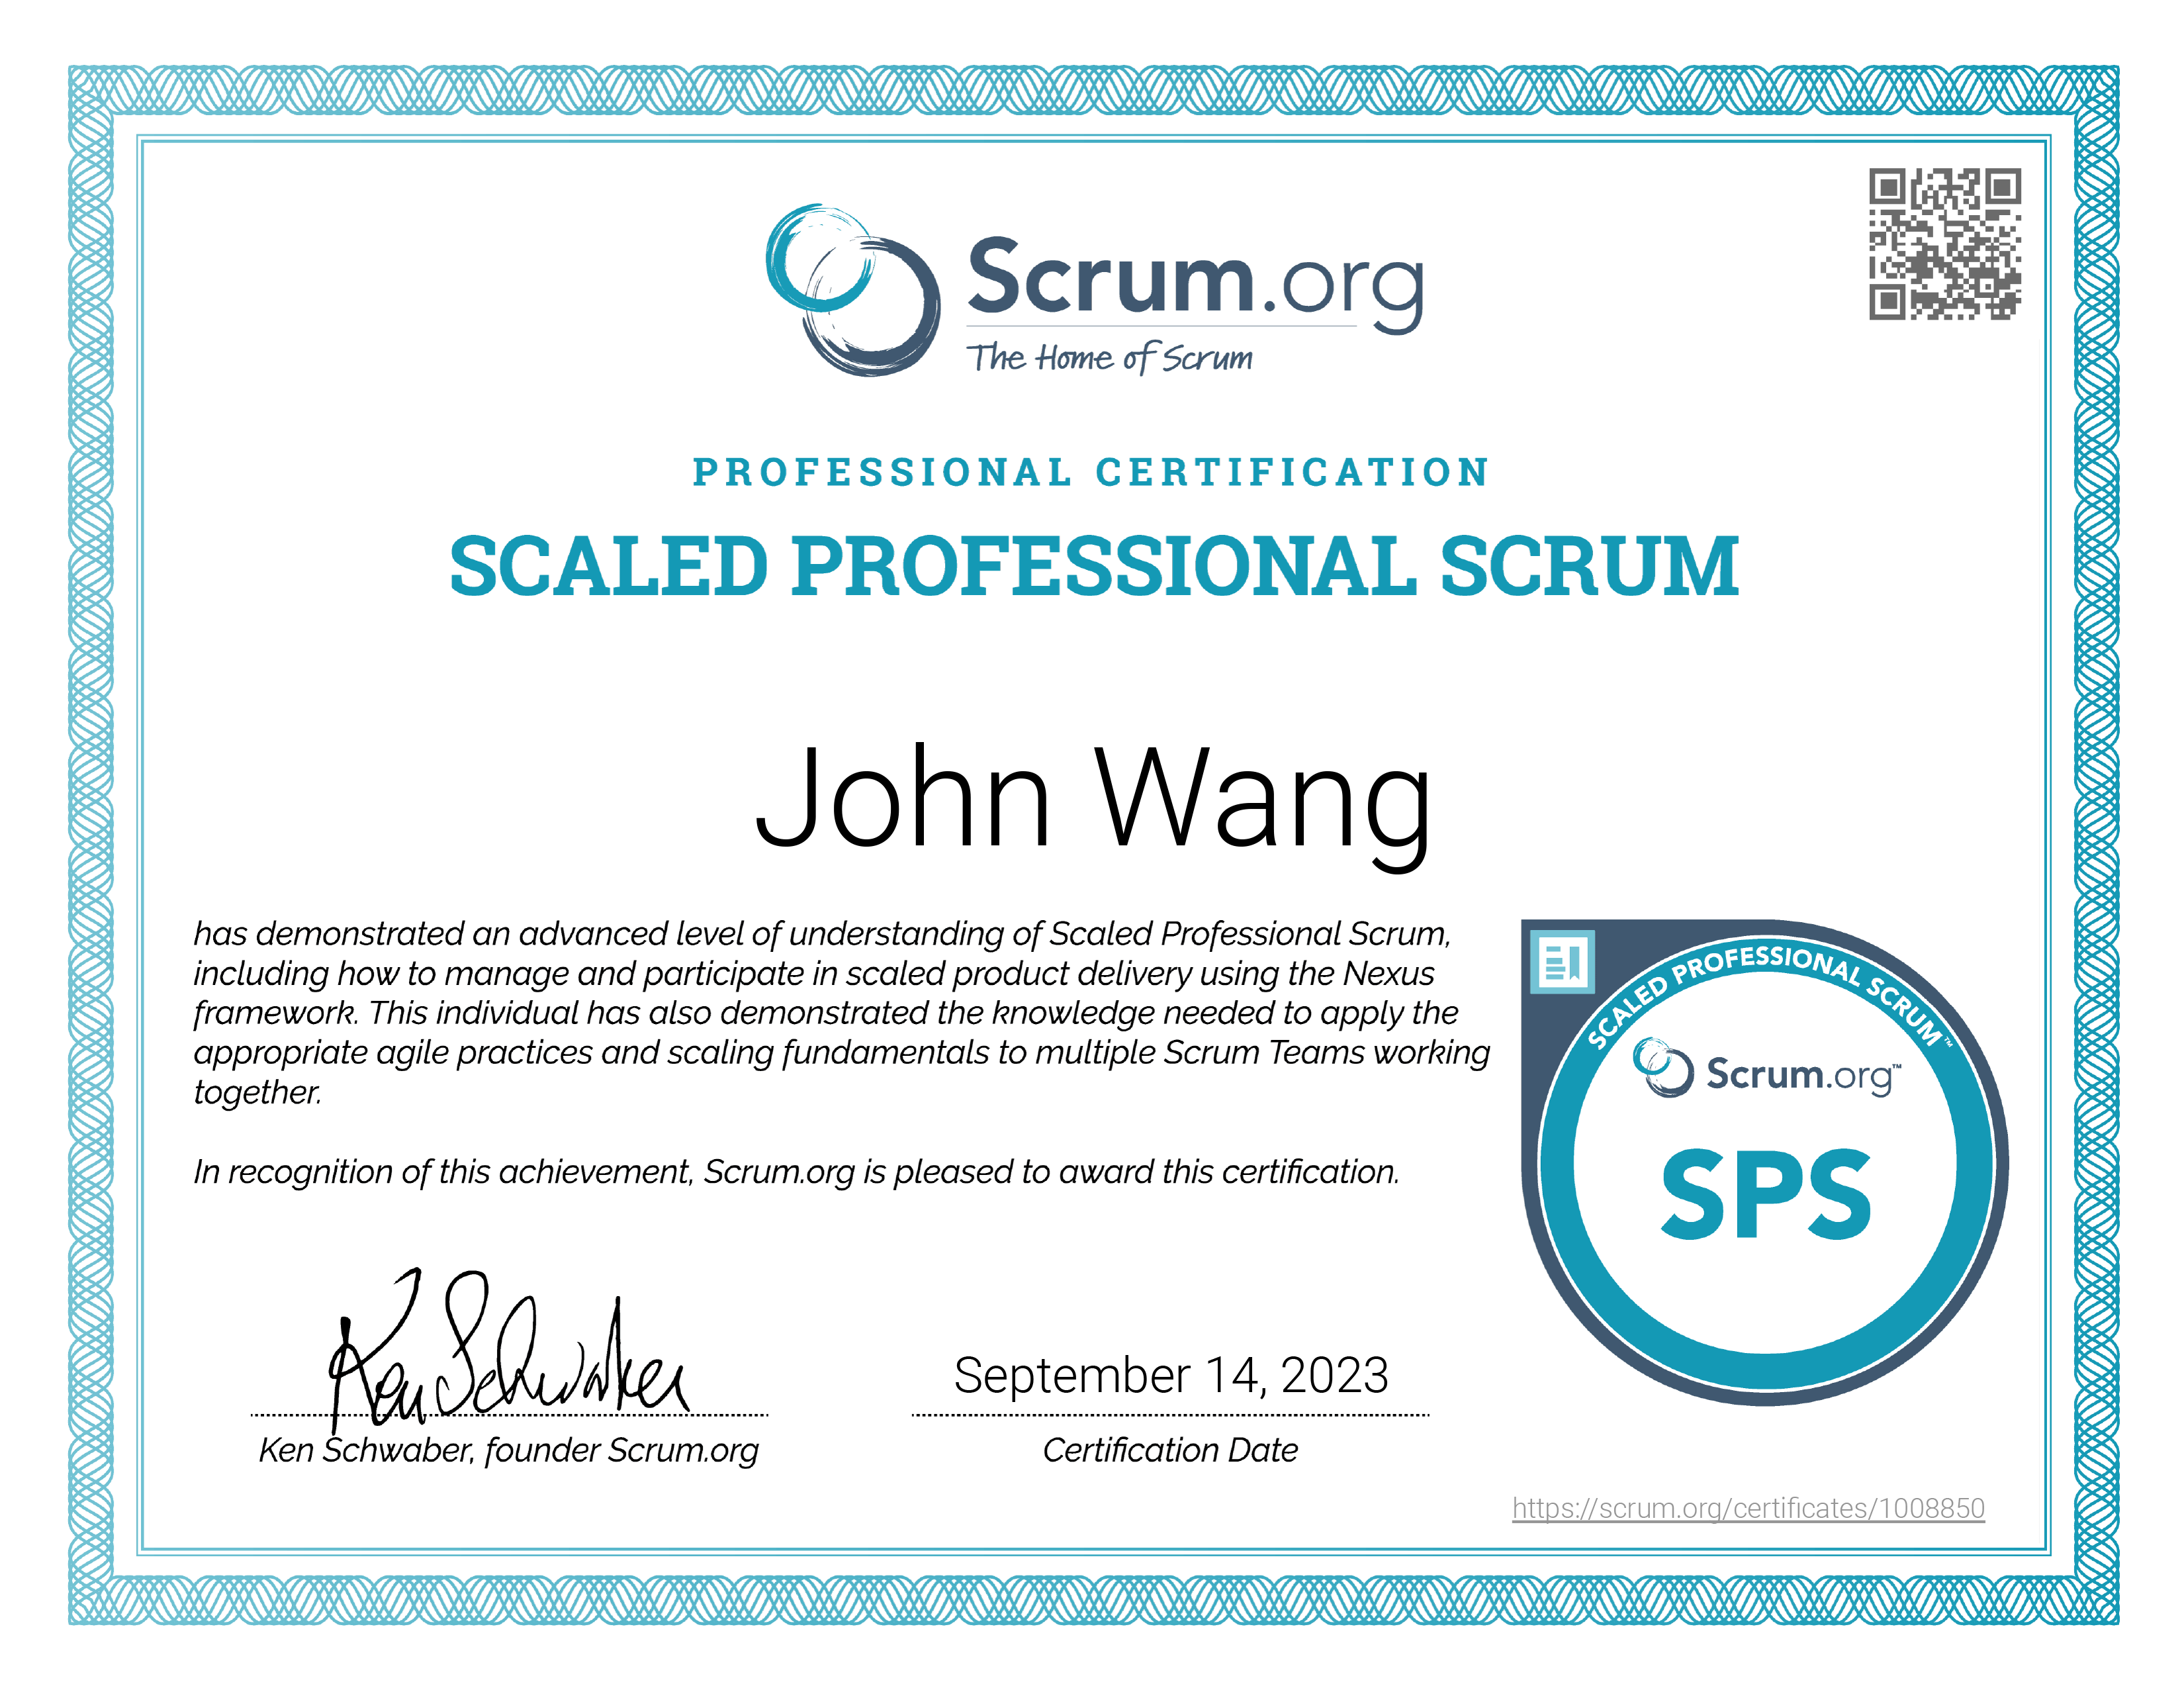 John's Scaled Professional Scrum (SPS) from Scrum.org